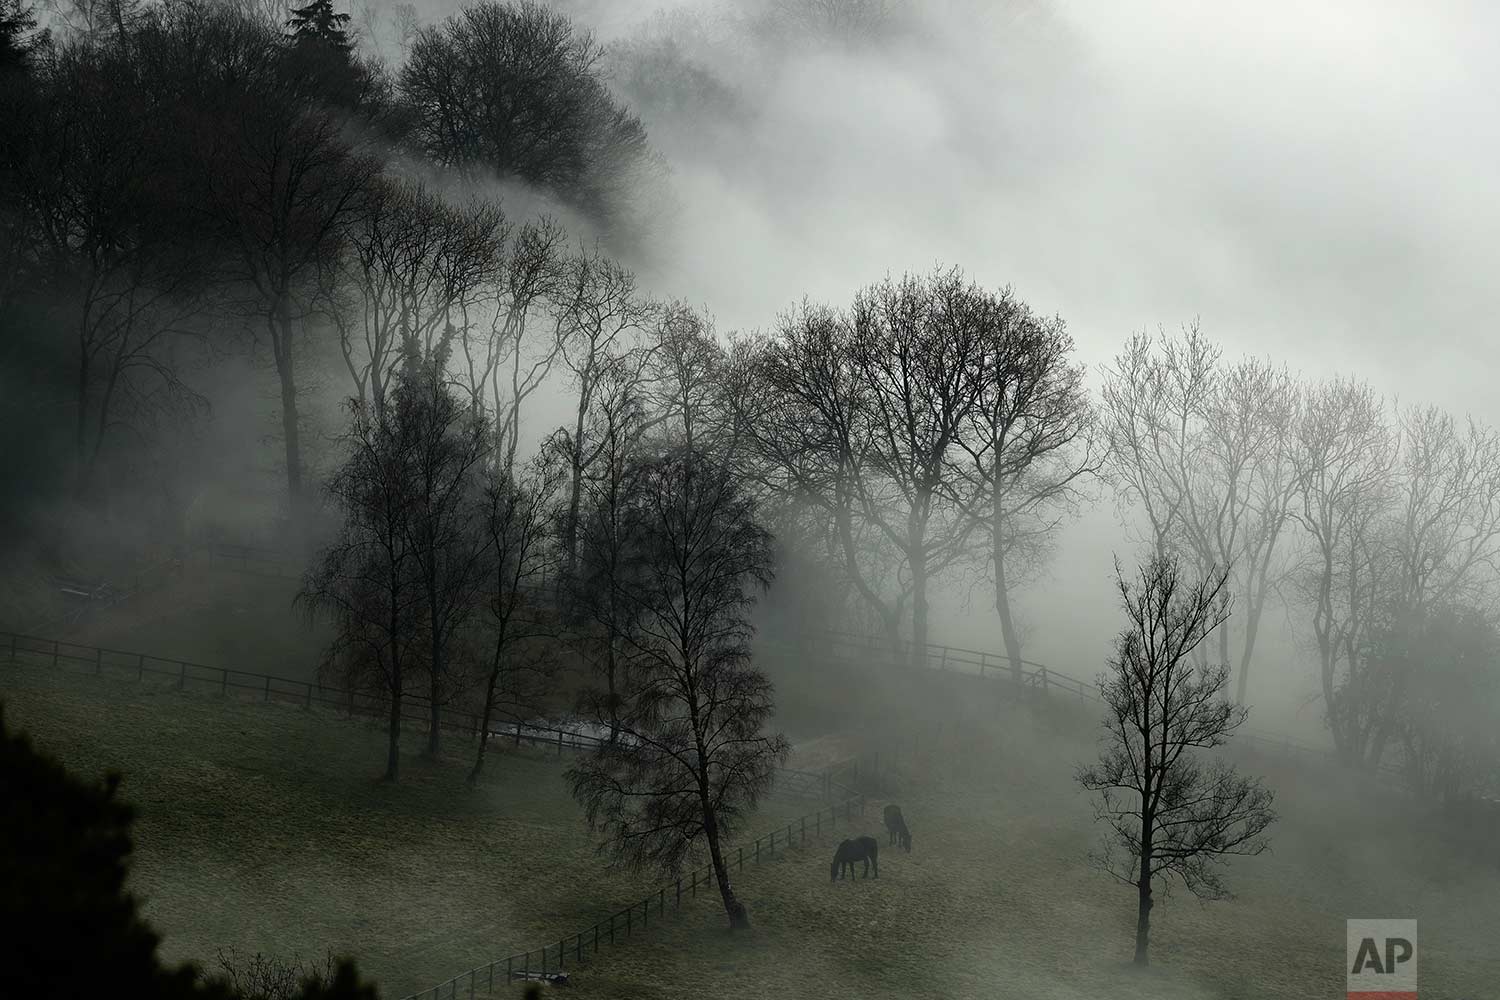  In this Monday, Jan. 23, 2017 photo, horses graze in a paddock with fog enveloping the trees behind them, as seen from Leith Hill in Surrey, south west of London. Thick fog has caused numerous flight delays and cancellations at London Heathrow and o